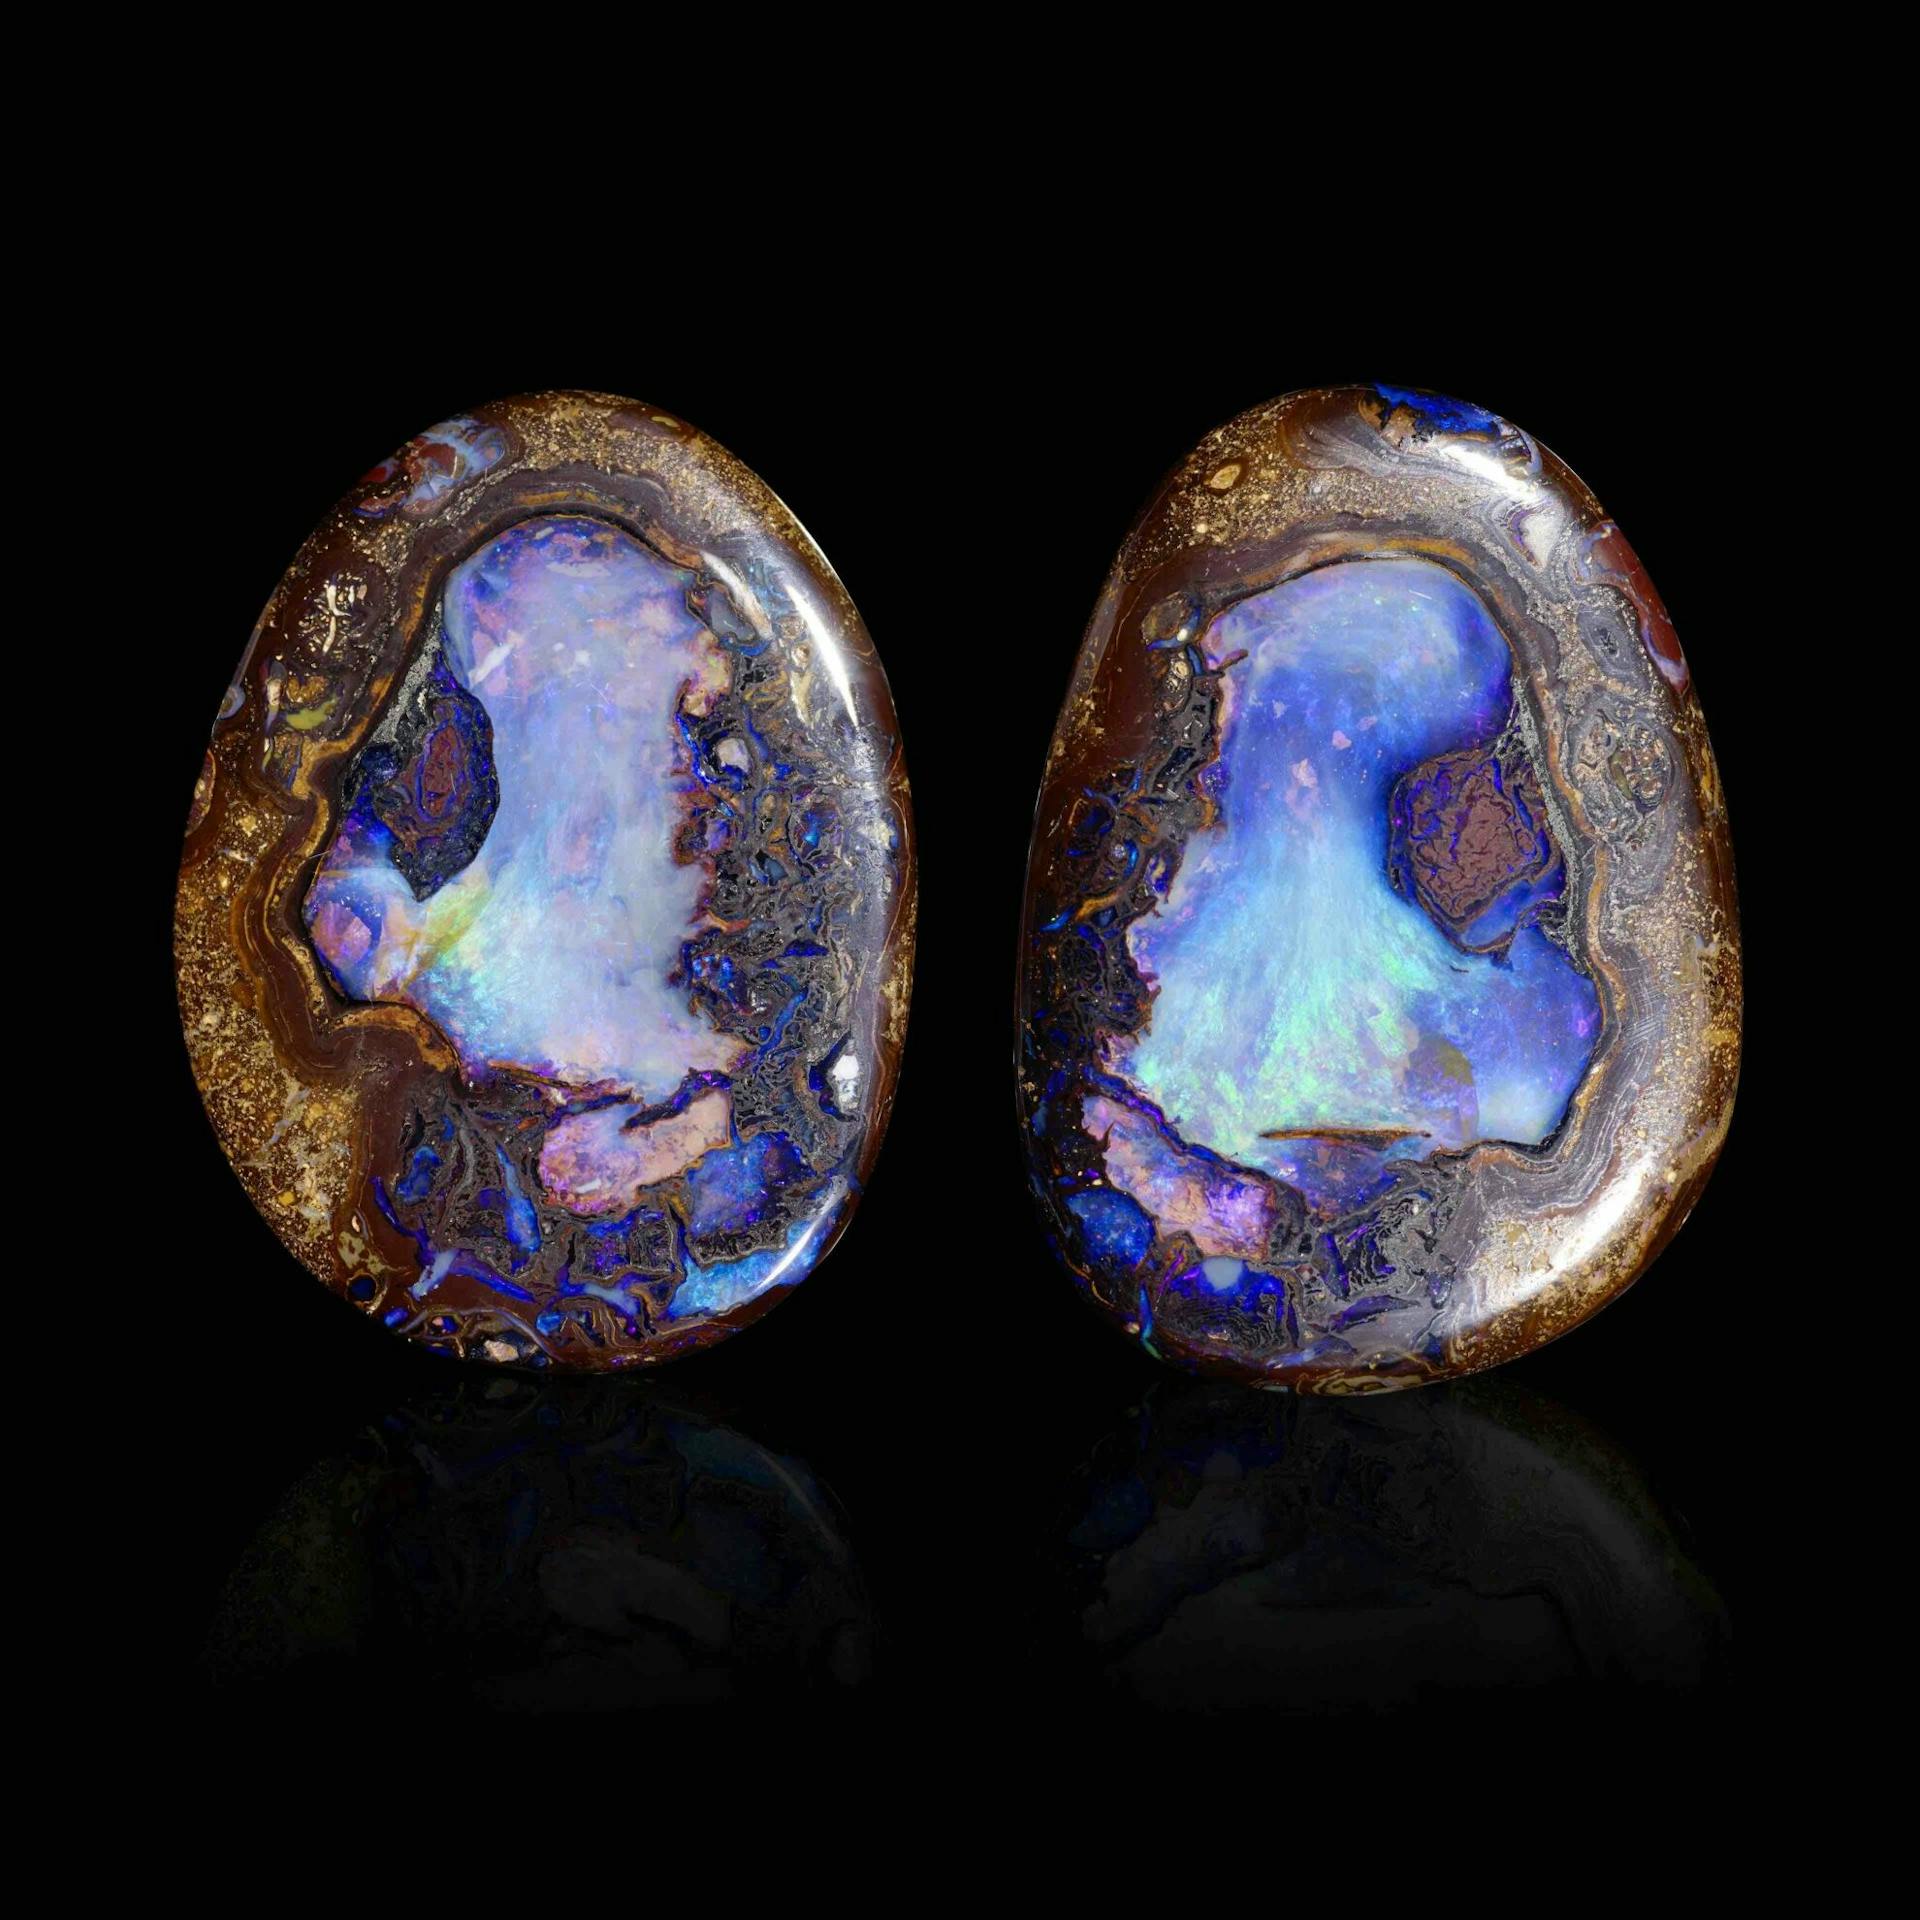 Yowah nuts - opals in the Australian Outback